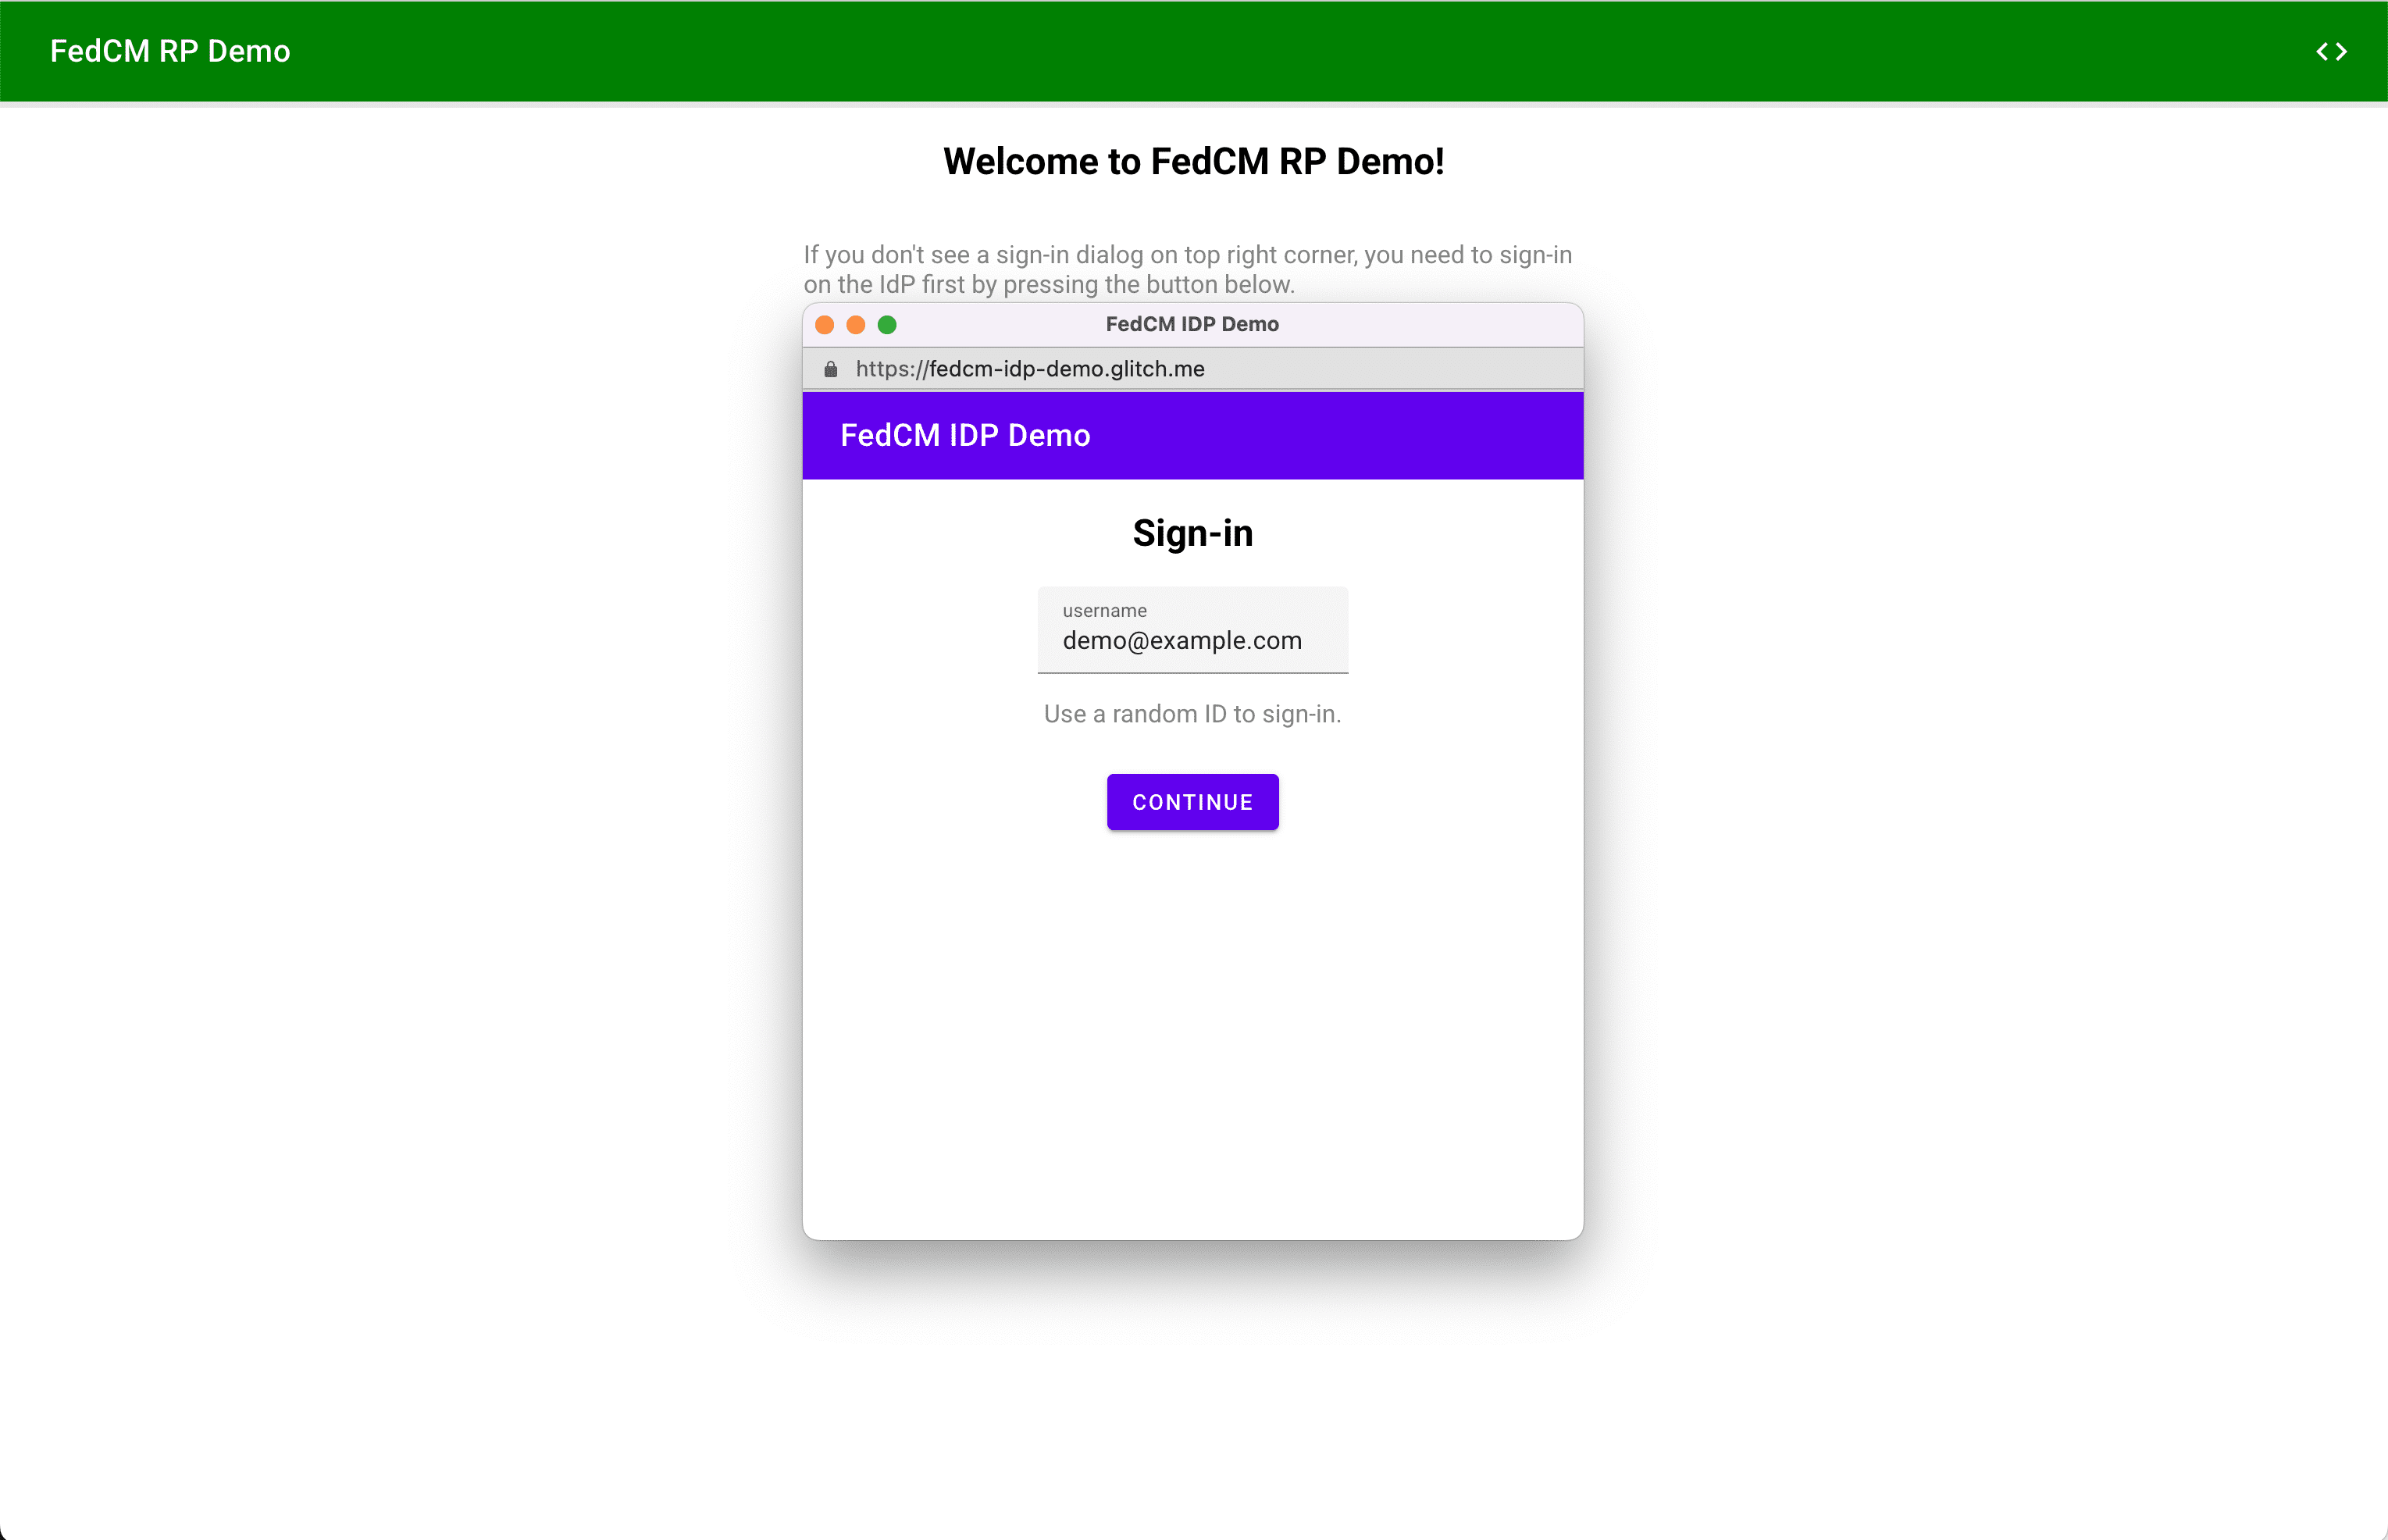 A popup window shown after clicking on the sign in to the IdP button.